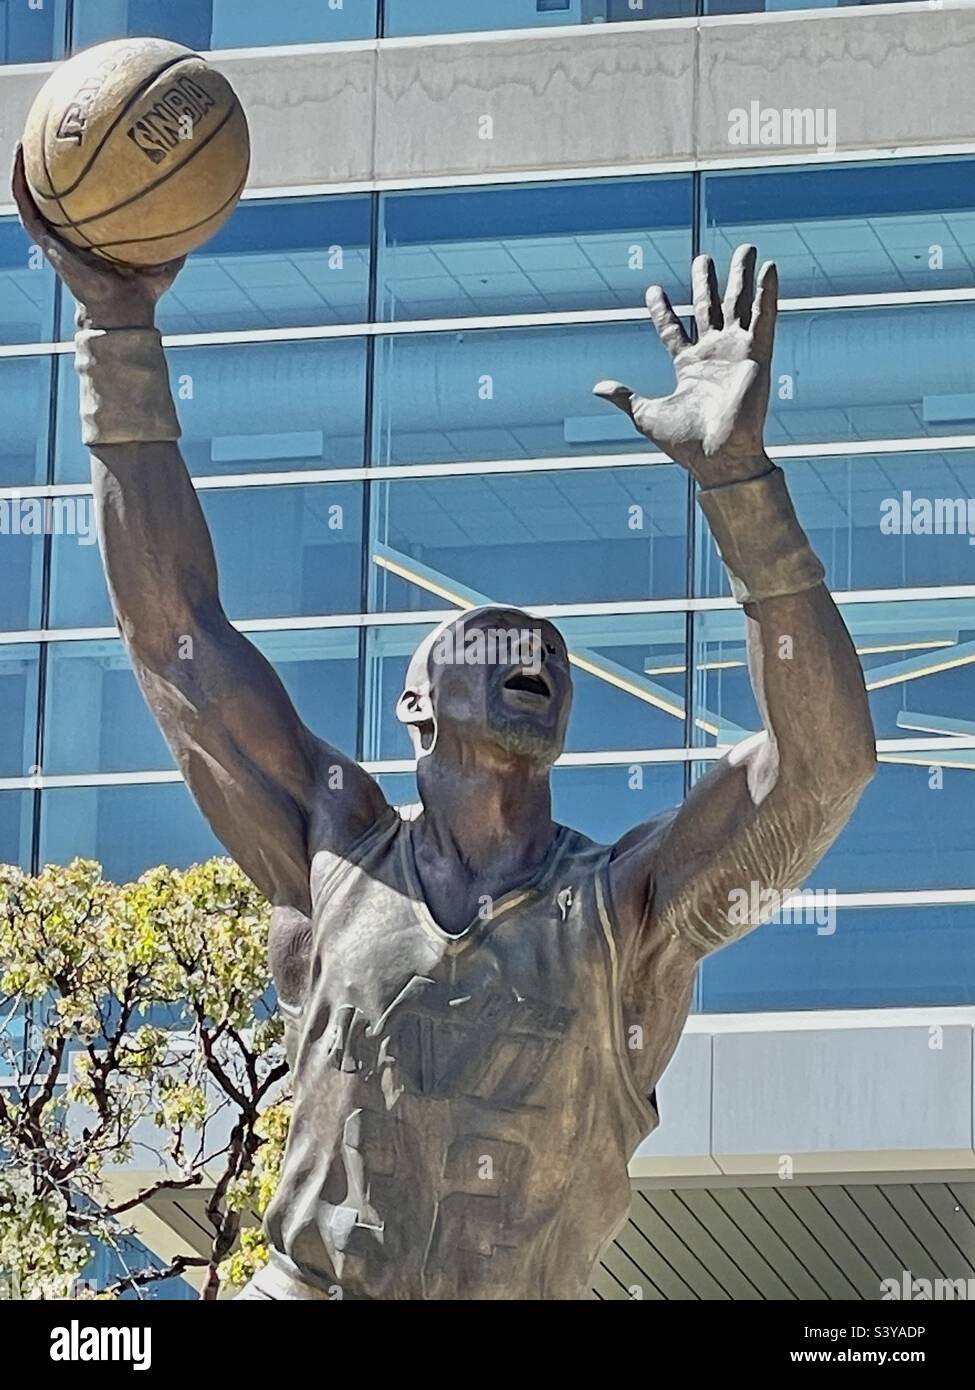 In front of the Vivint Arena, the home of the NBA team, The Utah Jazz, in downtown Salt Lake City, Utah, USA. This shows a larger than life bronze statue of one of the teams greats, Karl Malone. Stock Photo